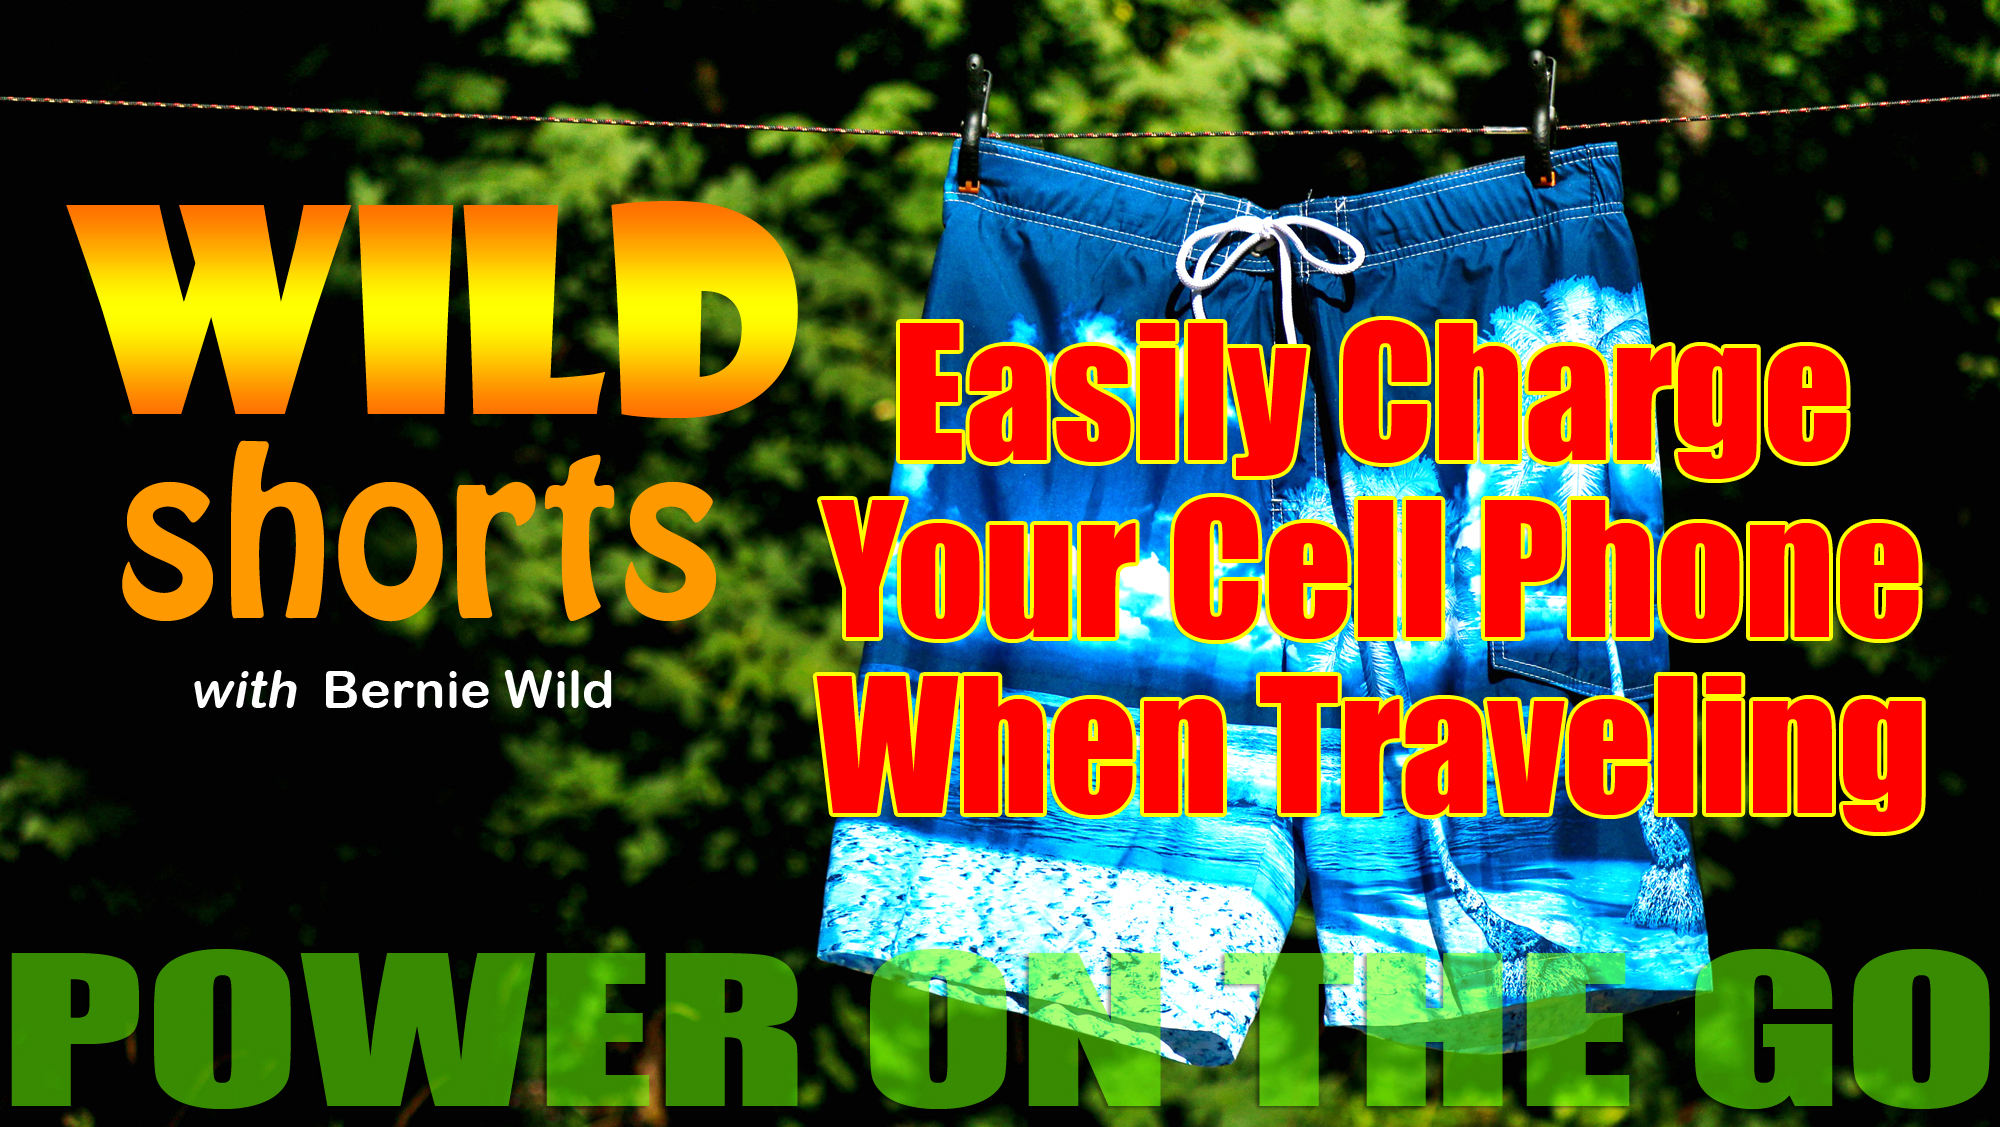 Easily Carry Battery Power for Cell Phone When Traveling